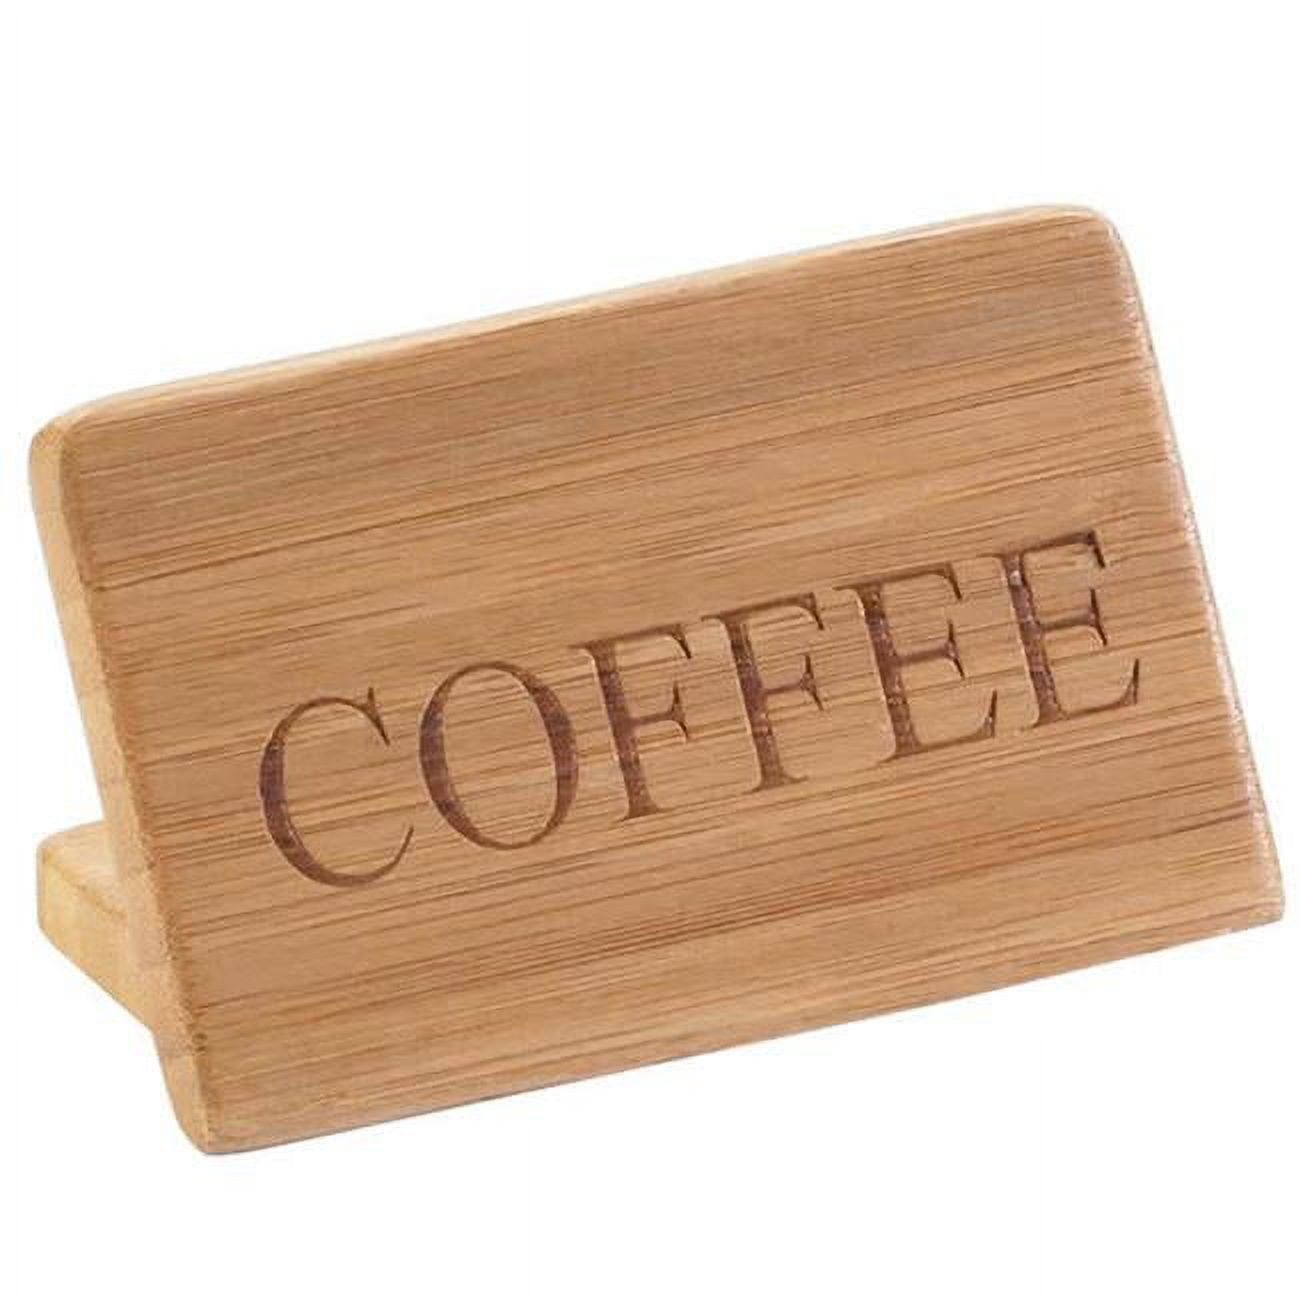 606-1 Bamboo Coffee Beverage Sign - 3 X 1 X 2 In.